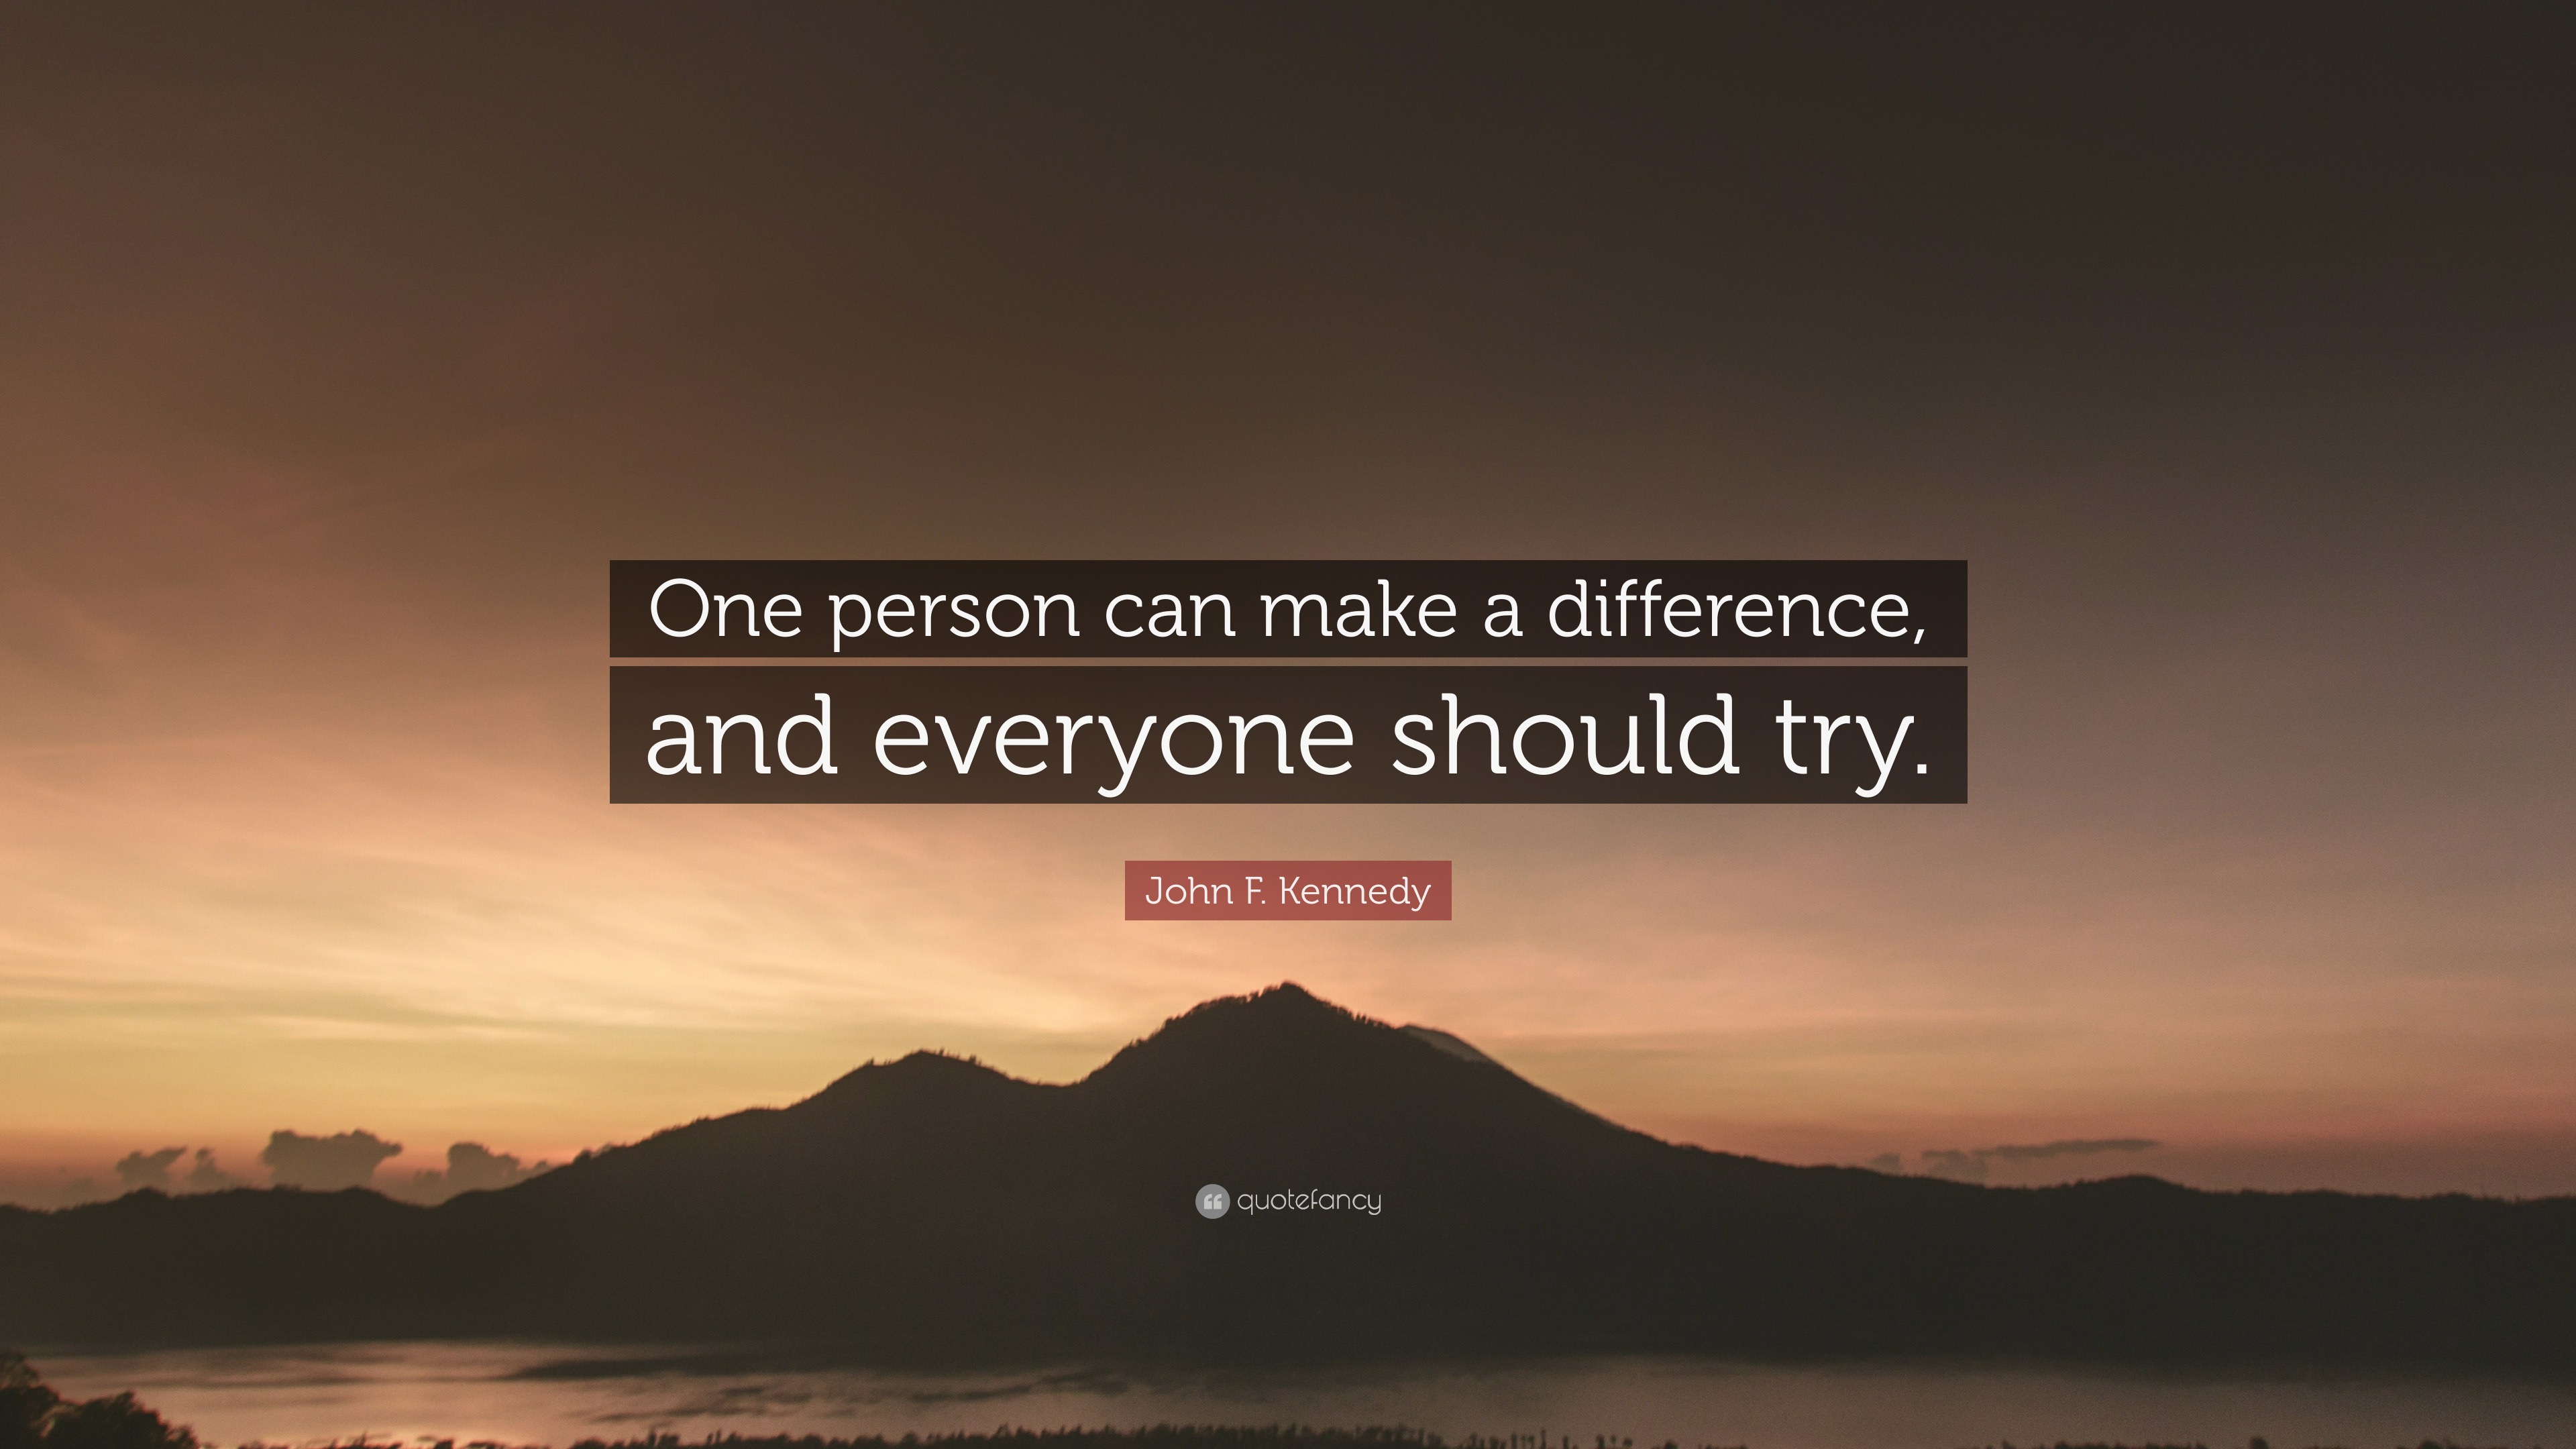 One Person Can Make A Difference and Everyone Should Try John F Kennedy Quote JFK Quote Poster 12x16 inches 